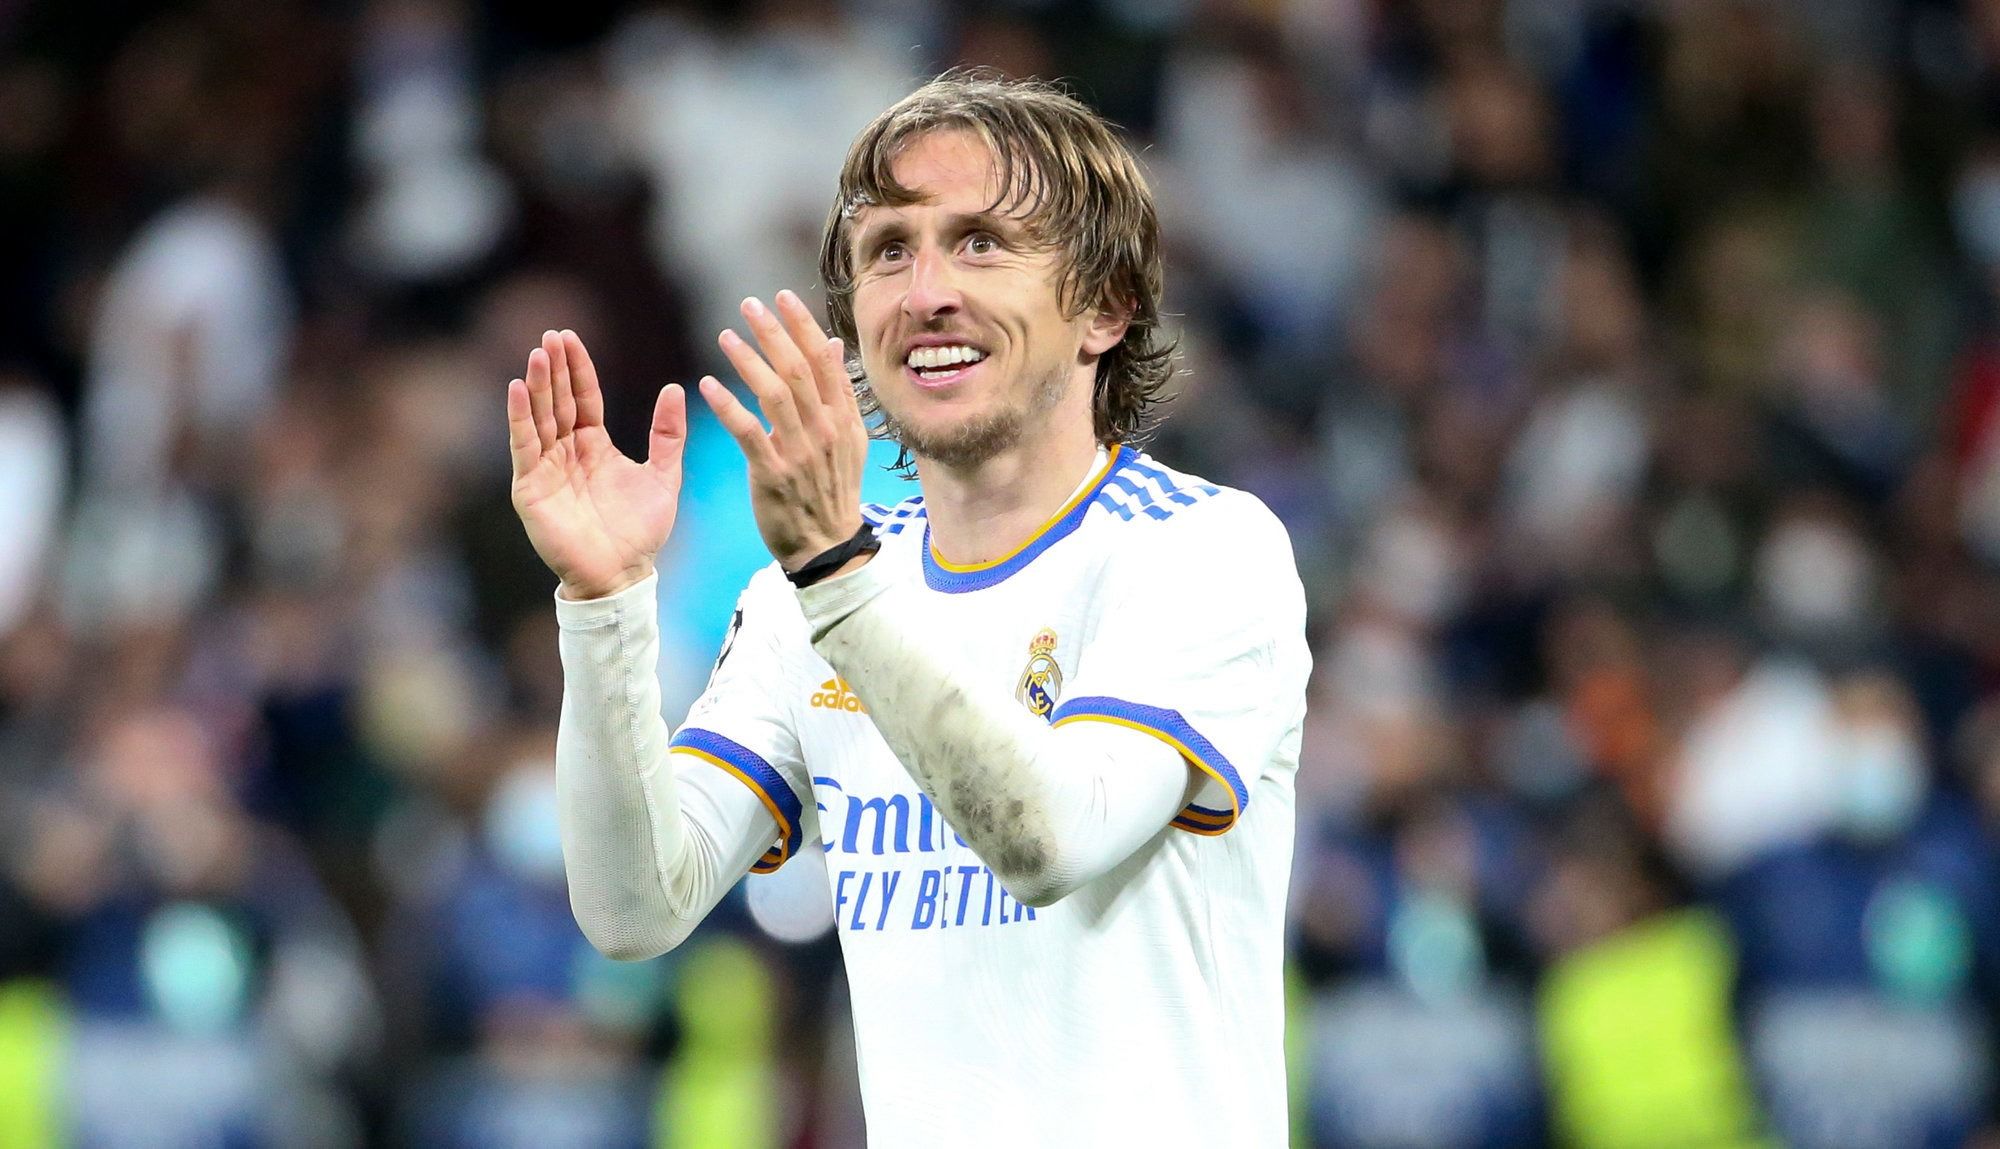 Real Madrid Secures Contract Extension With Modric For Another Year